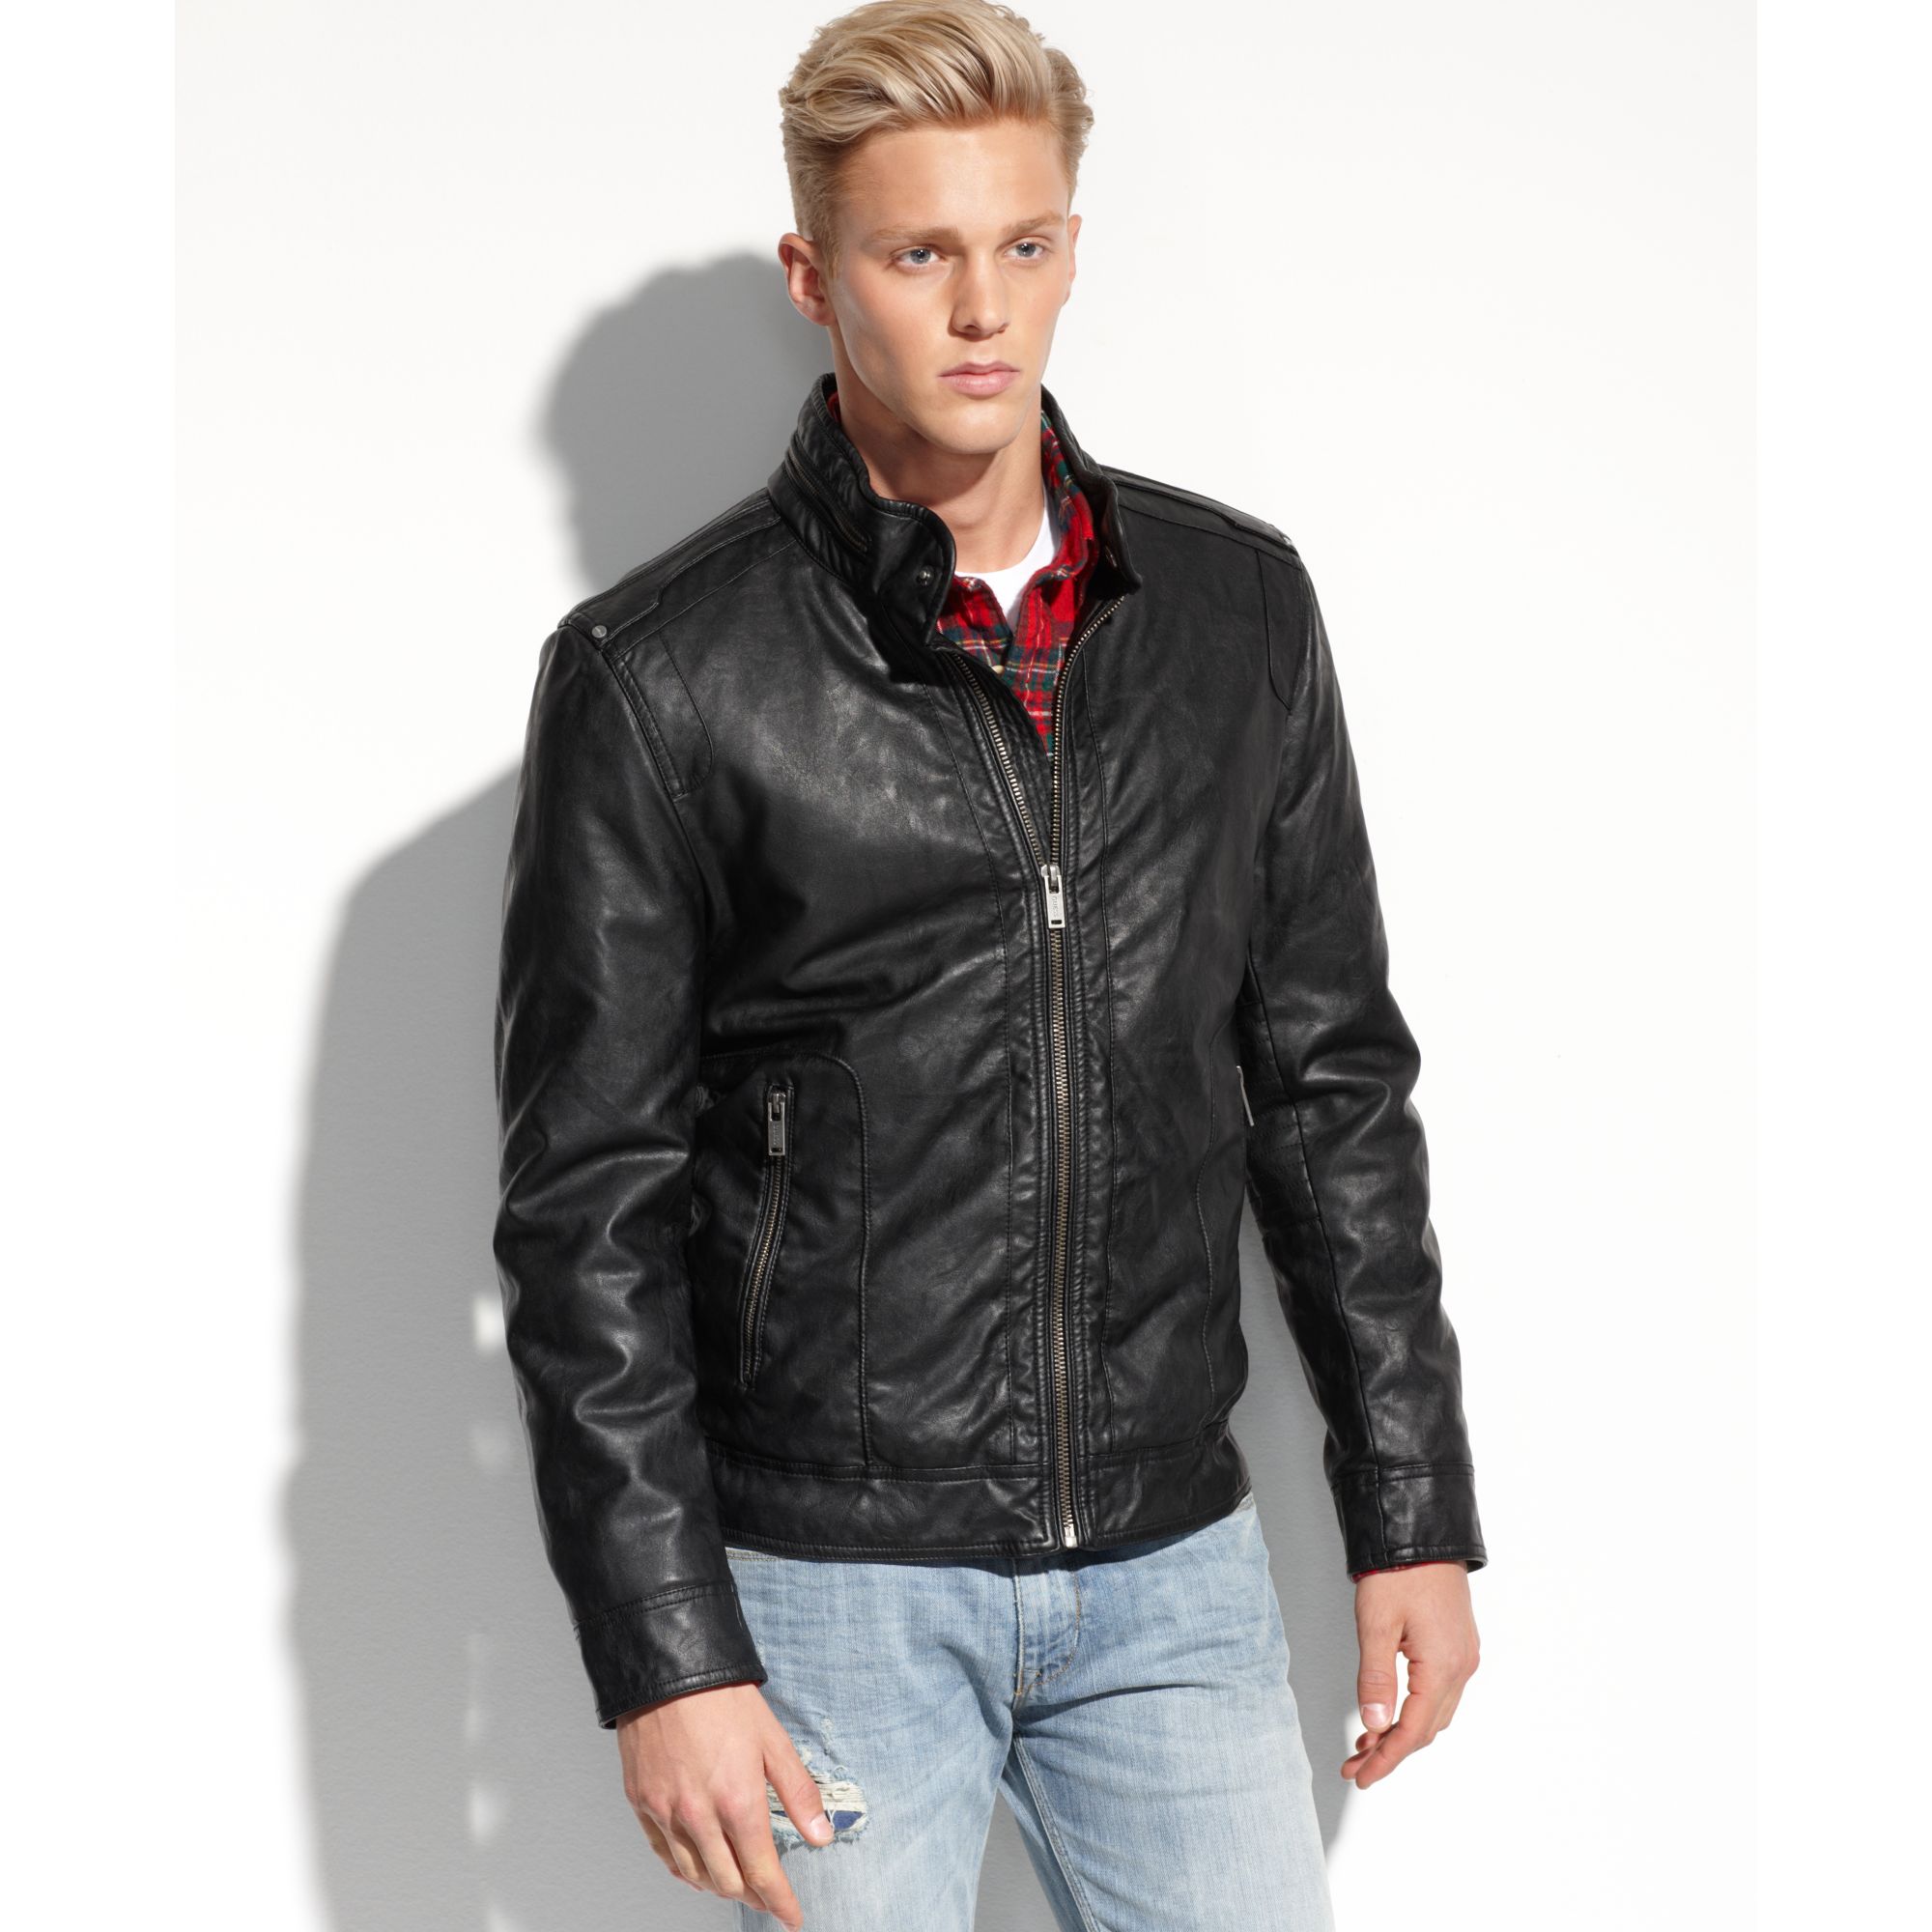 Lyst - Guess Coats Light Weight Faux Leather Moto Jacket in Black for Men